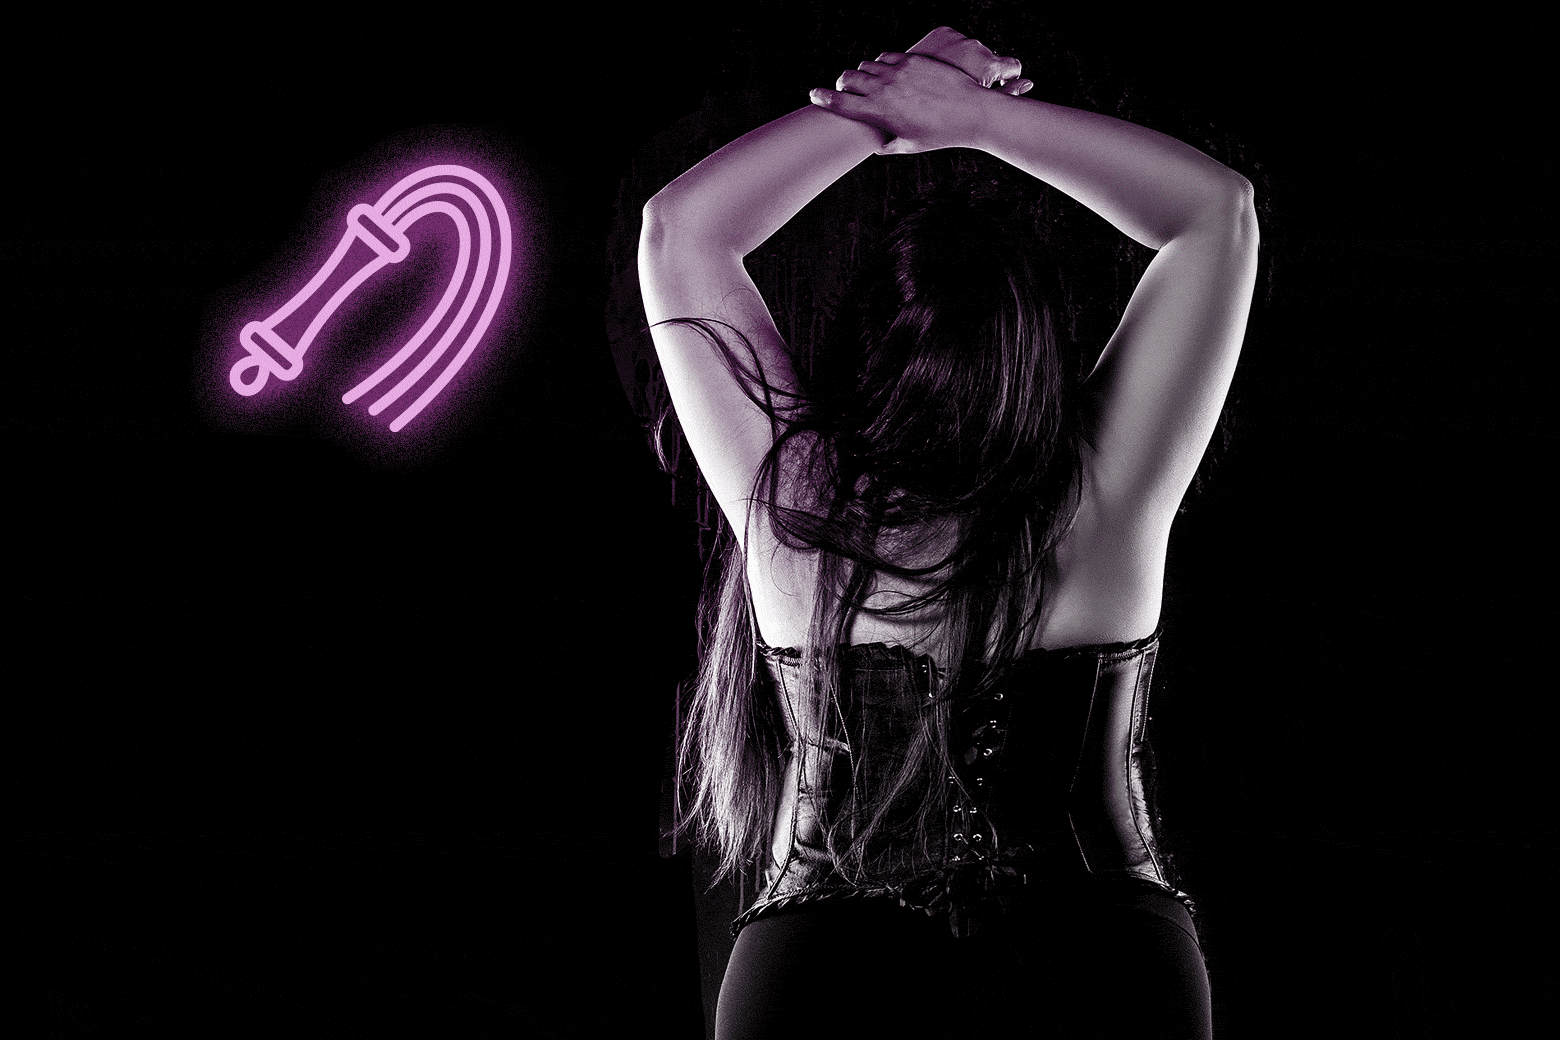 Woman with her hands up wearing a lace-up corset. There is a whip emoji floating beside her.